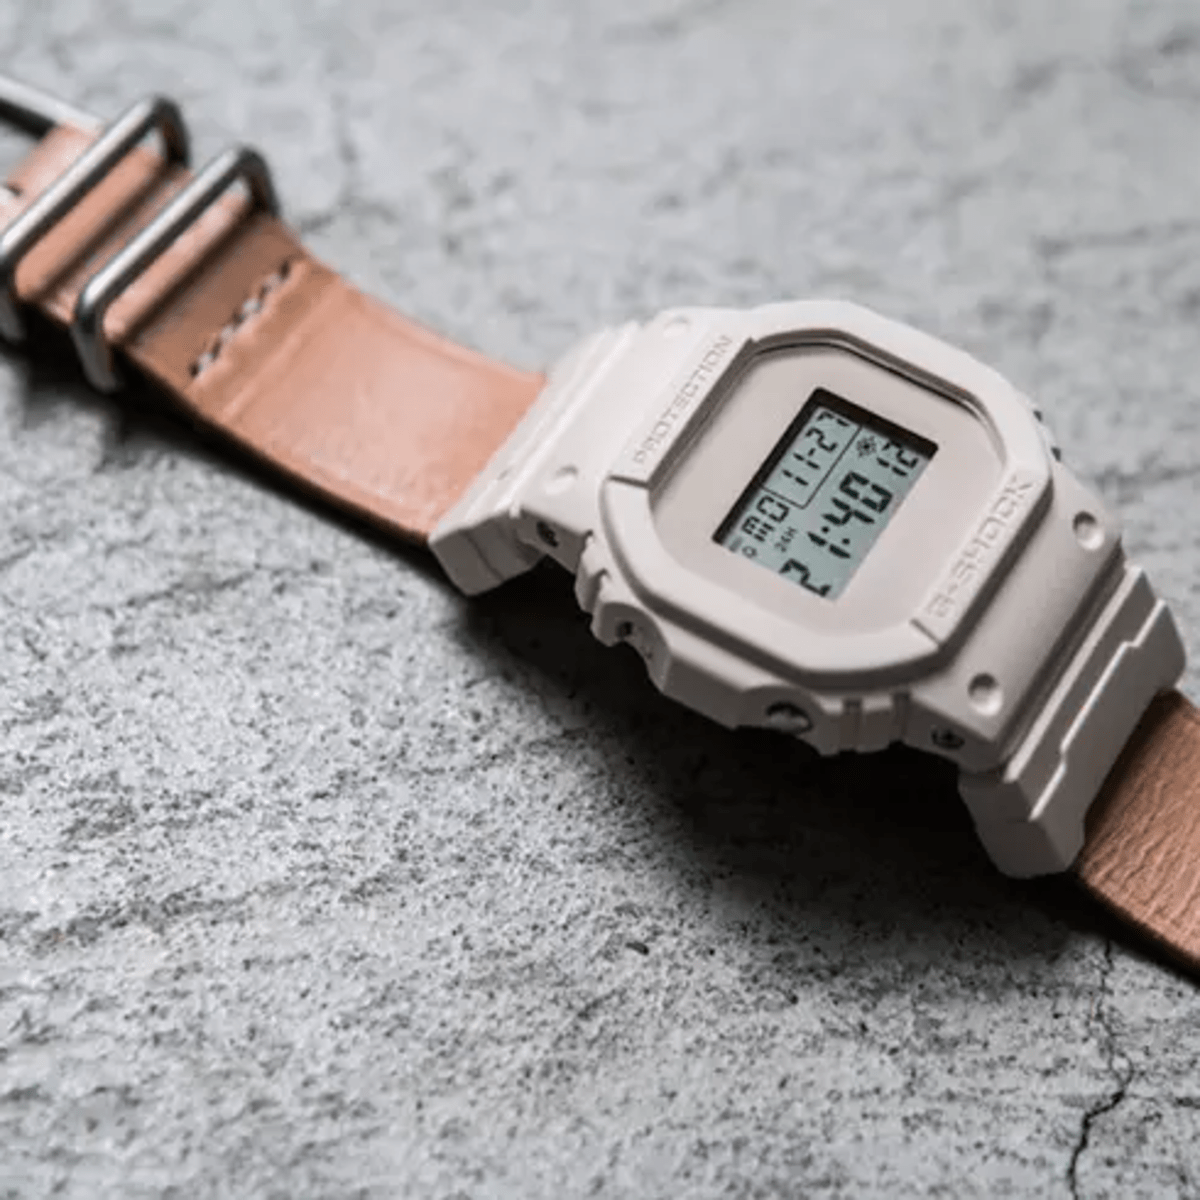 Hender Scheme brings its signature leather to the Casio G-SHOCK